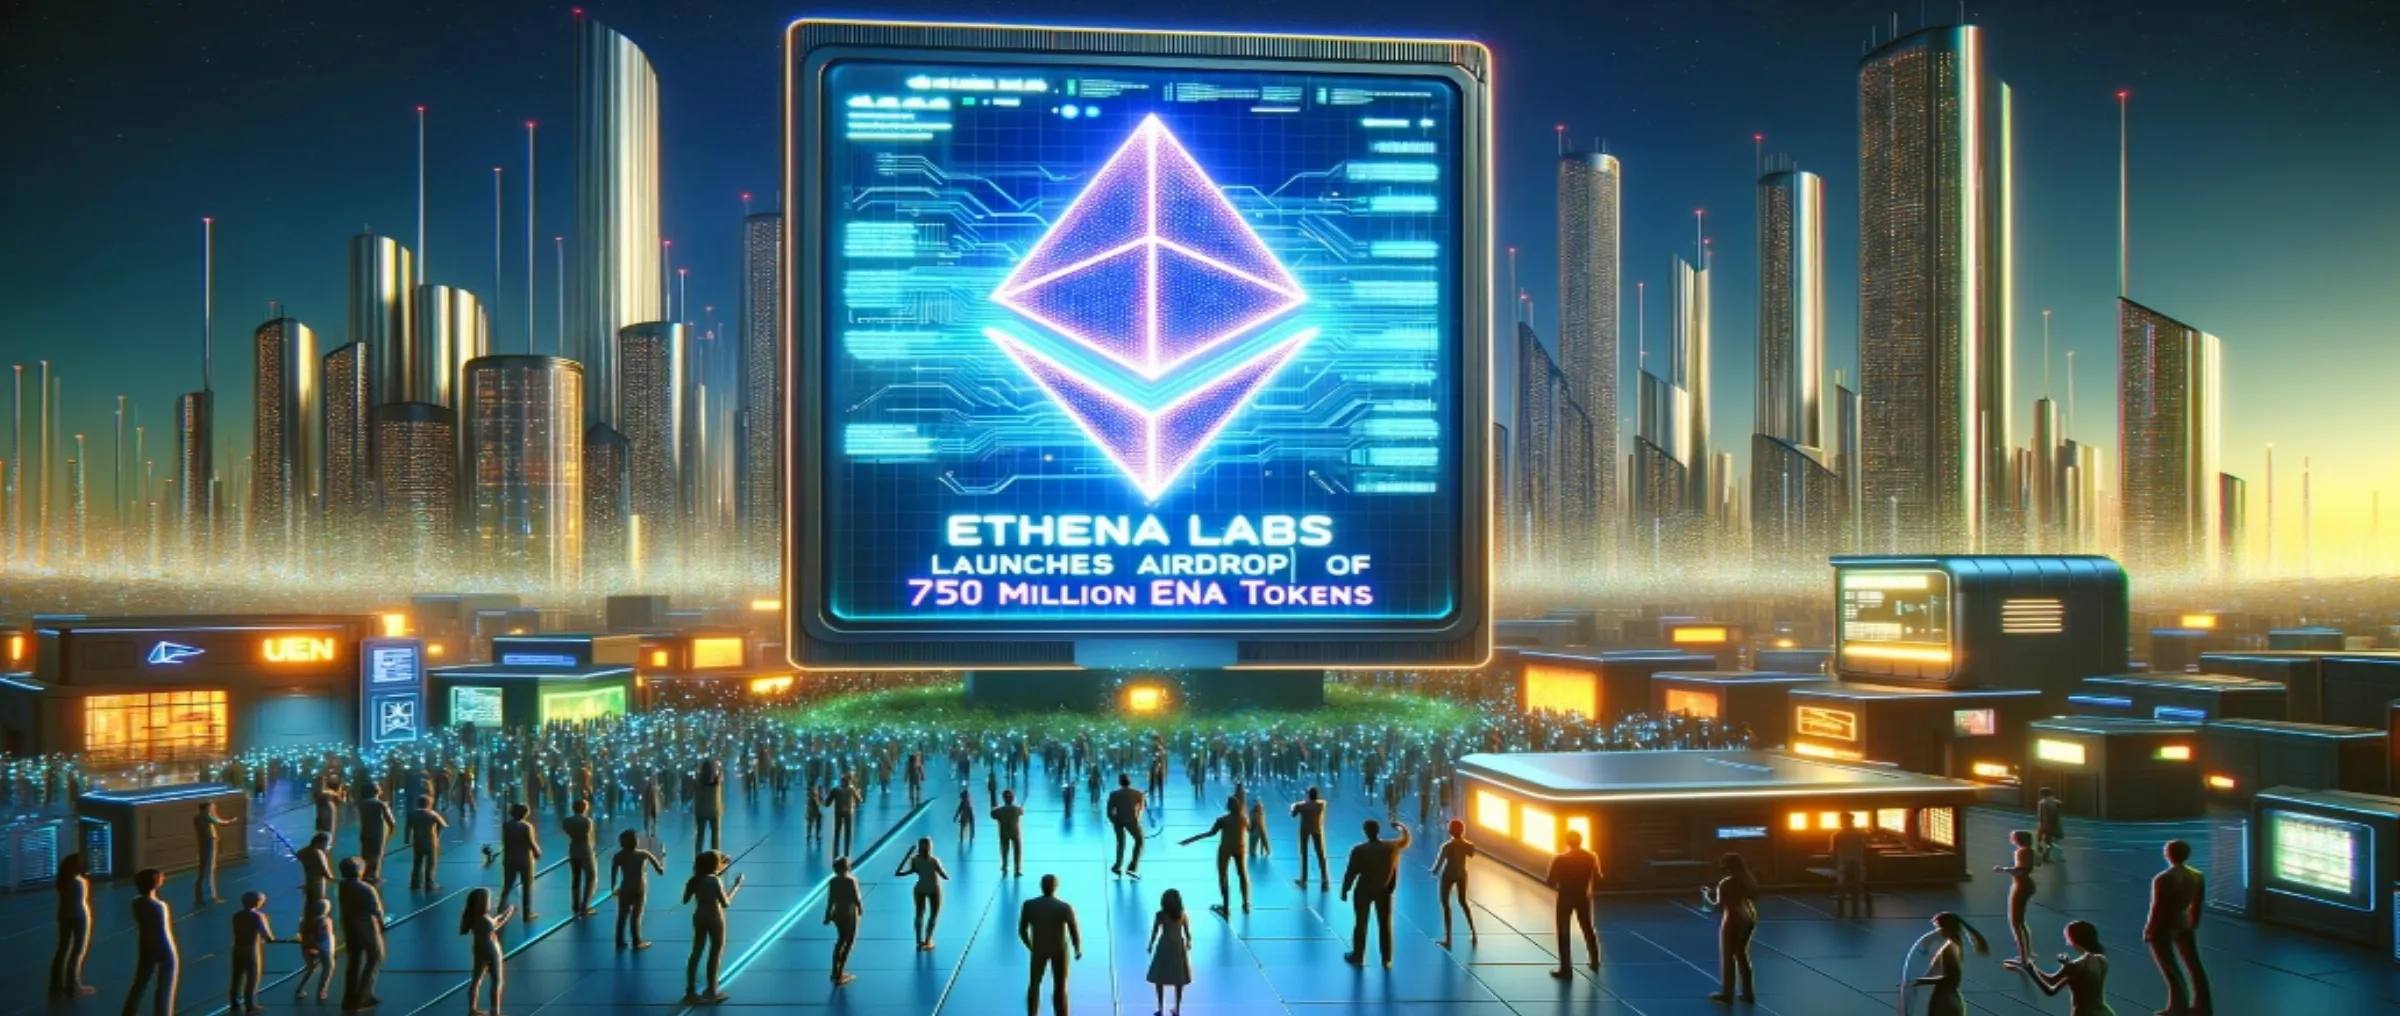 Ethena Labs to launch airdrop of 750 million ENA Tokens